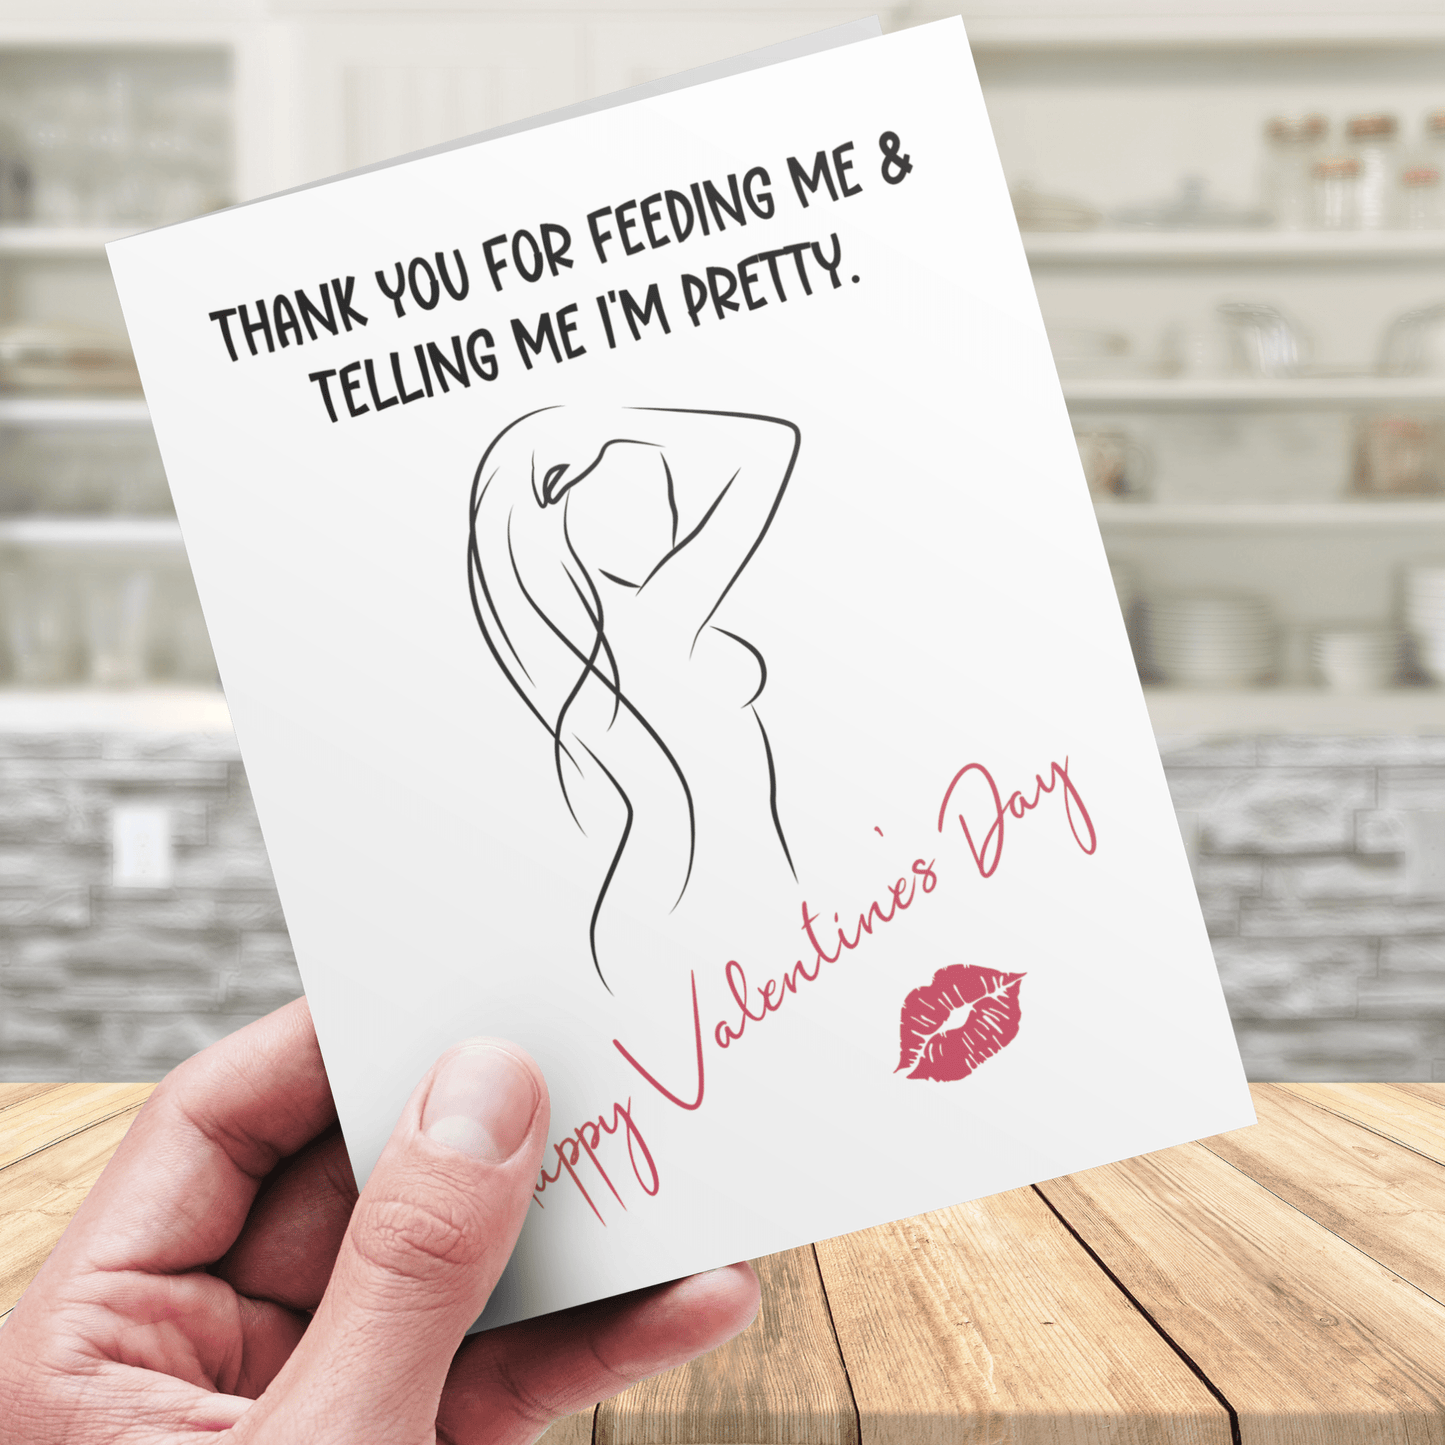 Couple Digital Valentine's Day Greeting Card: Thank You For Feeding Me & Telling Me I'm Pretty